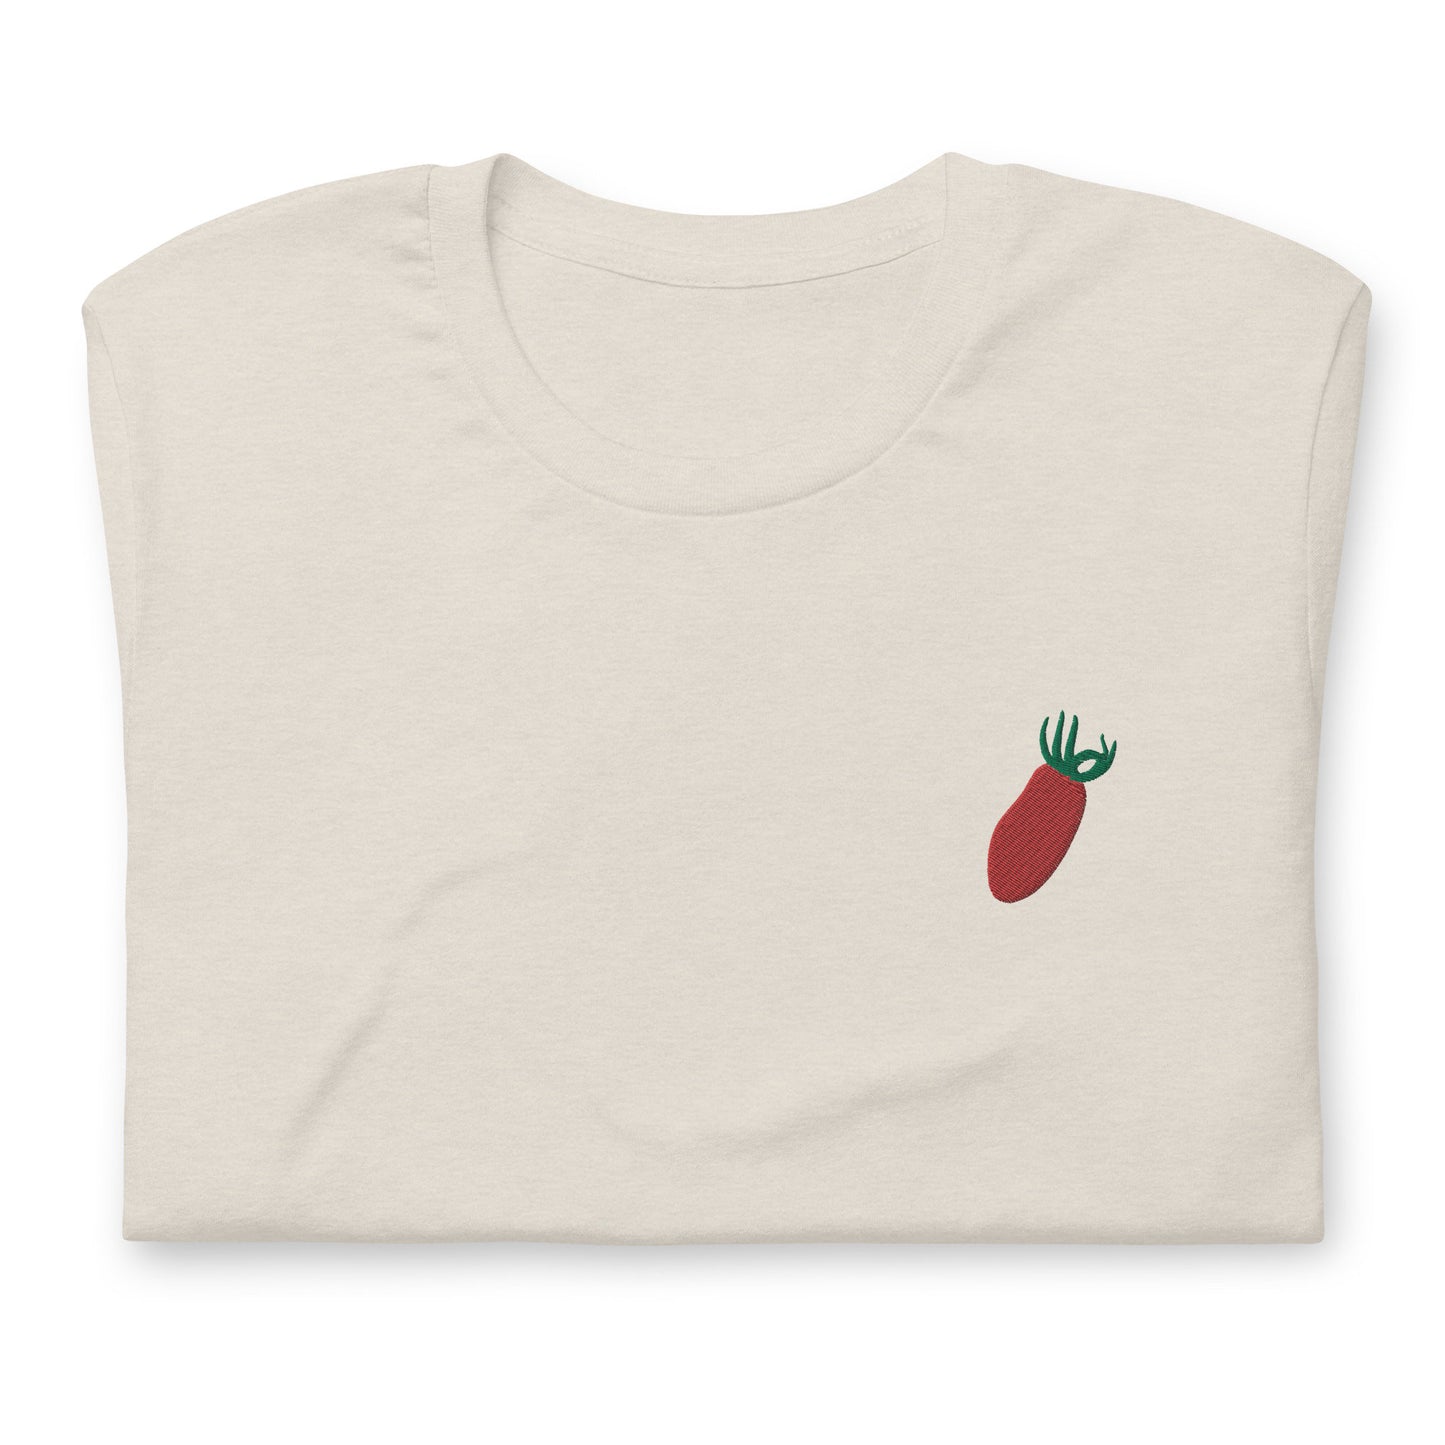 San Marzano Shirt - Italian Food Lovers - Pasta Sauce Makers -Cotton Embroidered Shirt - Multiple Colors